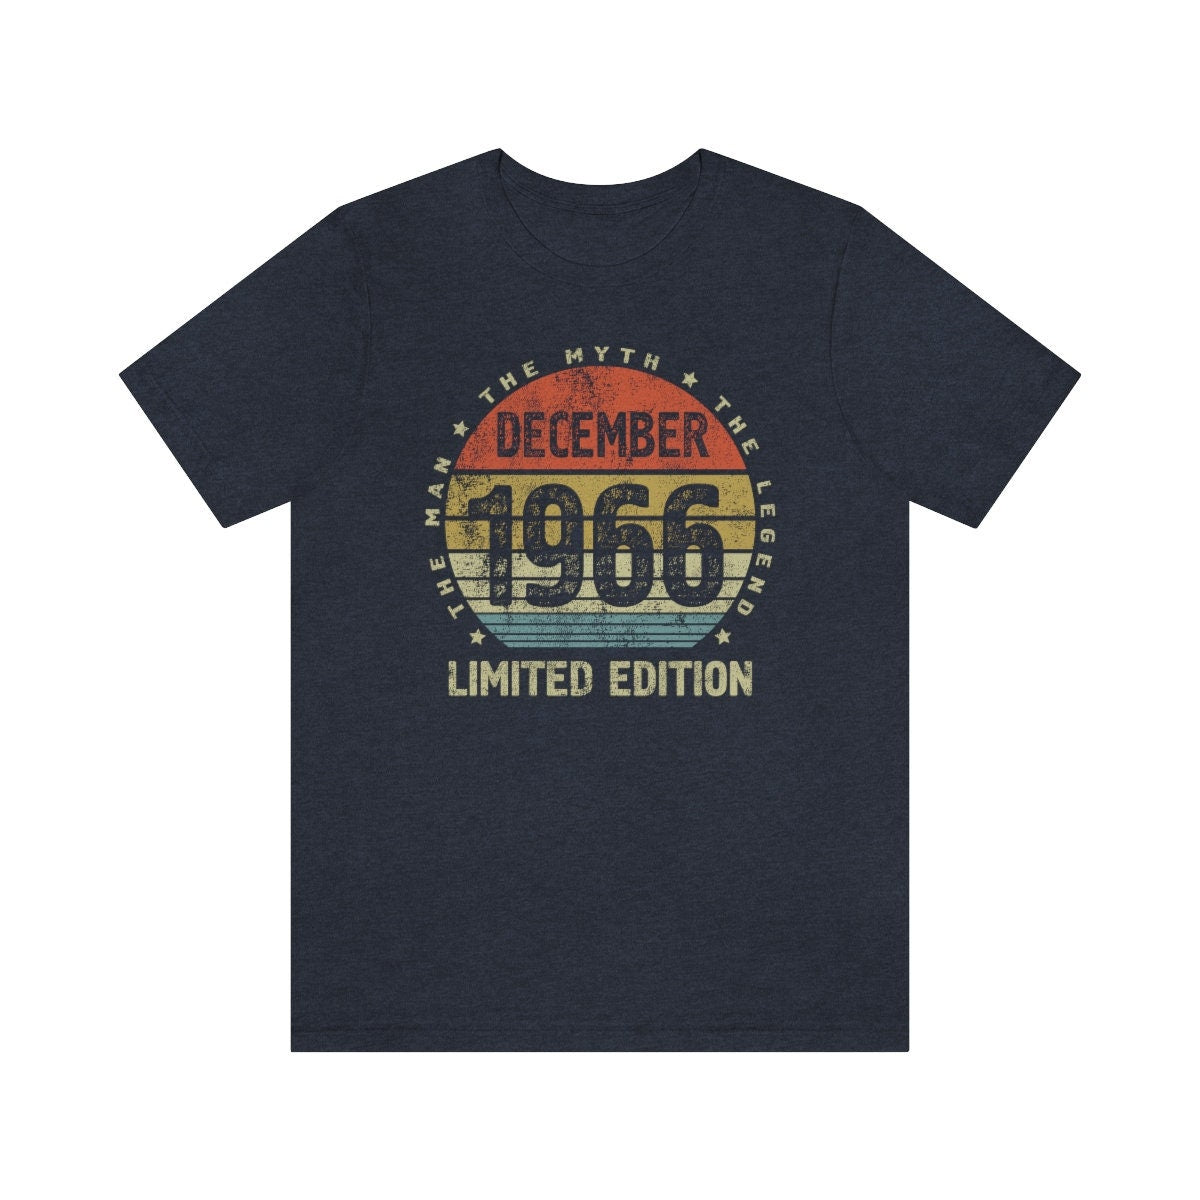 December 1966 birthday gift t-shirt for husband or father, Born in 1966 shirt for dad or brother